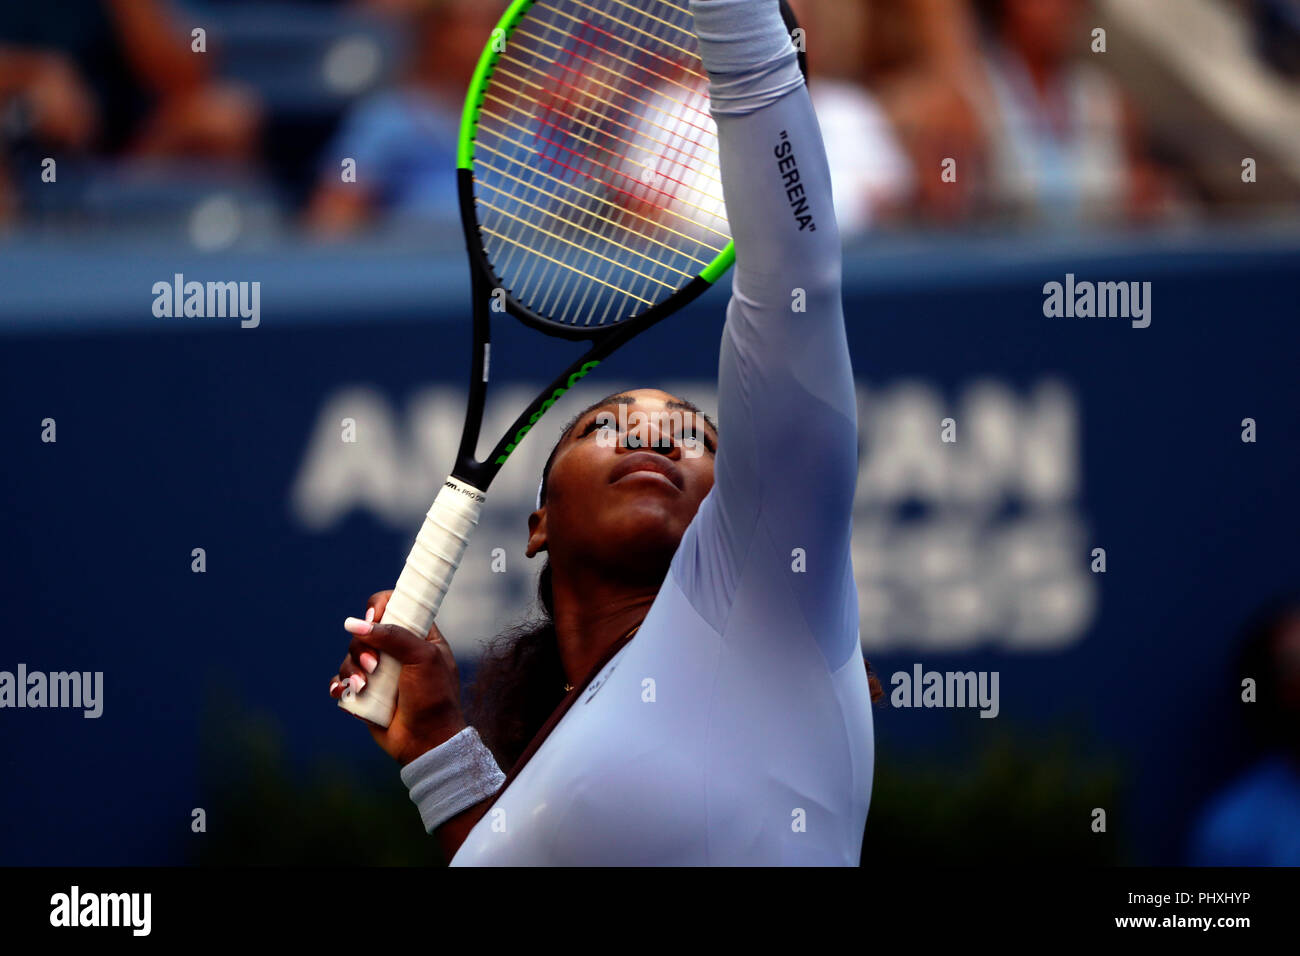 New York, United States. 02nd Sep, 2018. Flushing Meadows, New York - September 2, 2018: US Open Tennis: Serena Williams serving to Kala Kanepi of Estonia during their fourth round match at the US Open in Flushing Meadows, New York. Williams won in three sets. Credit: Adam Stoltman/Alamy Live News Stock Photo